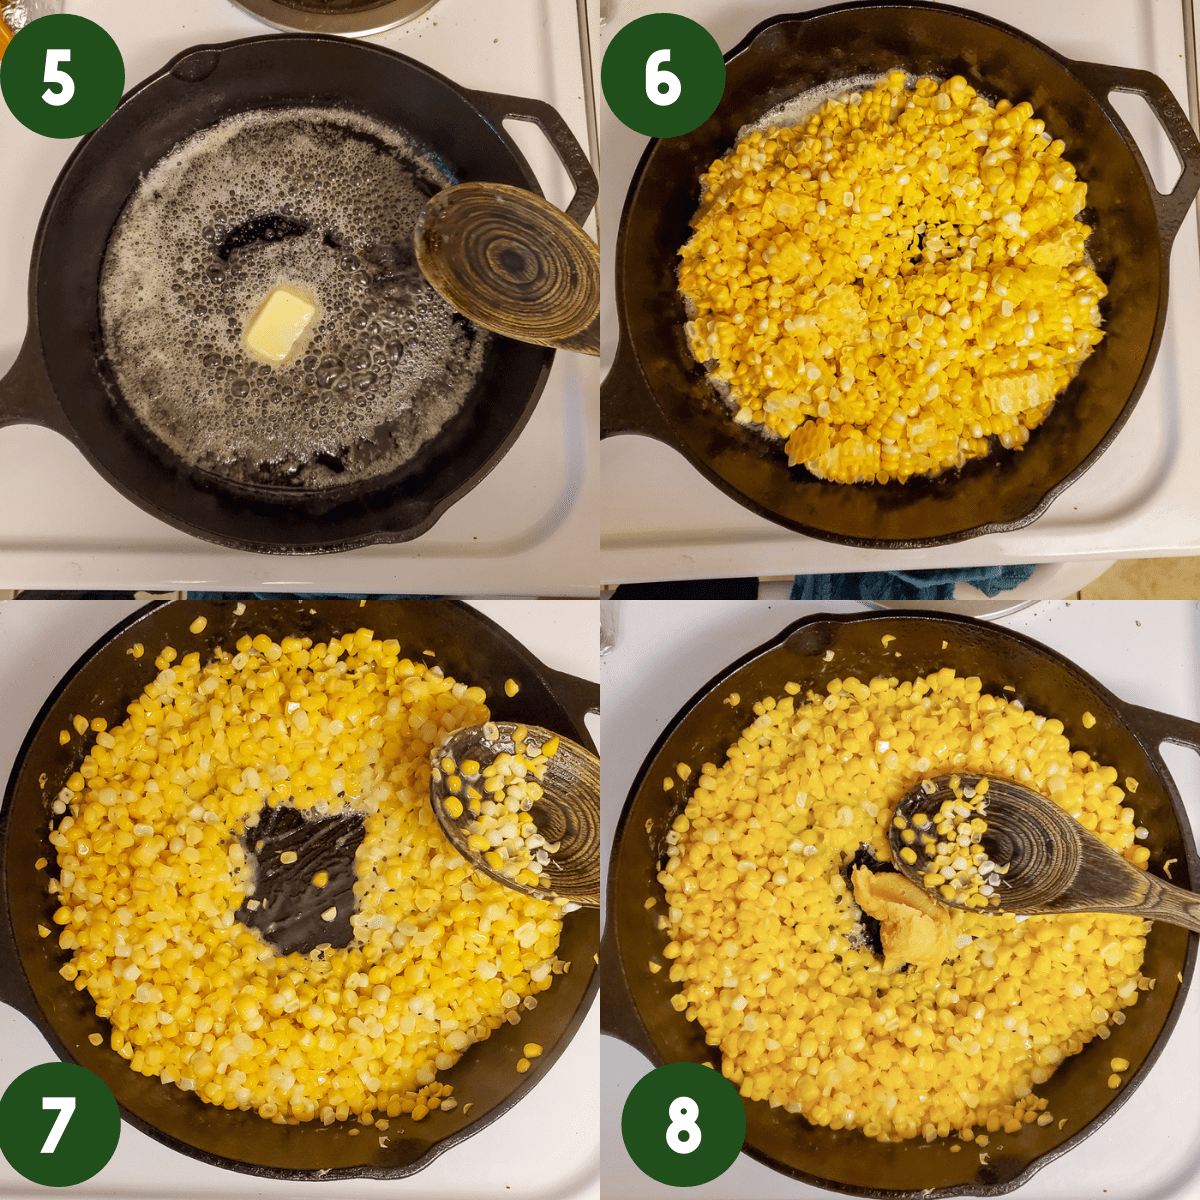 2 by 2 photo collage showing steps 5-8 in cooking; Step 5) Melted butter in a cast iron skillet, Step 6) Fresh corn kernels in cast iron pan, Step 7) Cooked corn kernels in a cast iron skillet Step 8) Miso paste placed in center of cast iron skillet with corn.